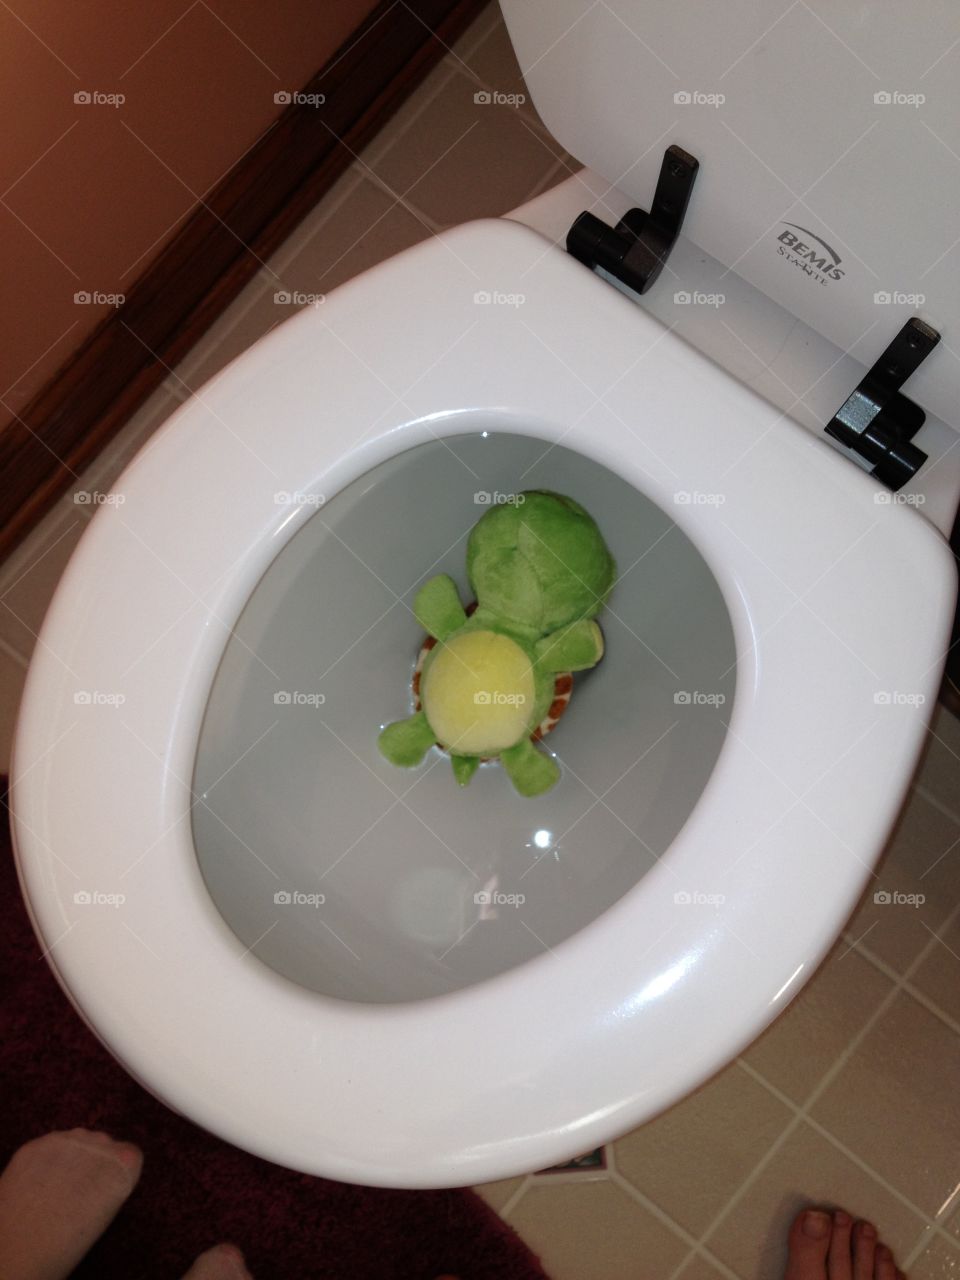 Stuffed turtle in the toilet
Life with kids